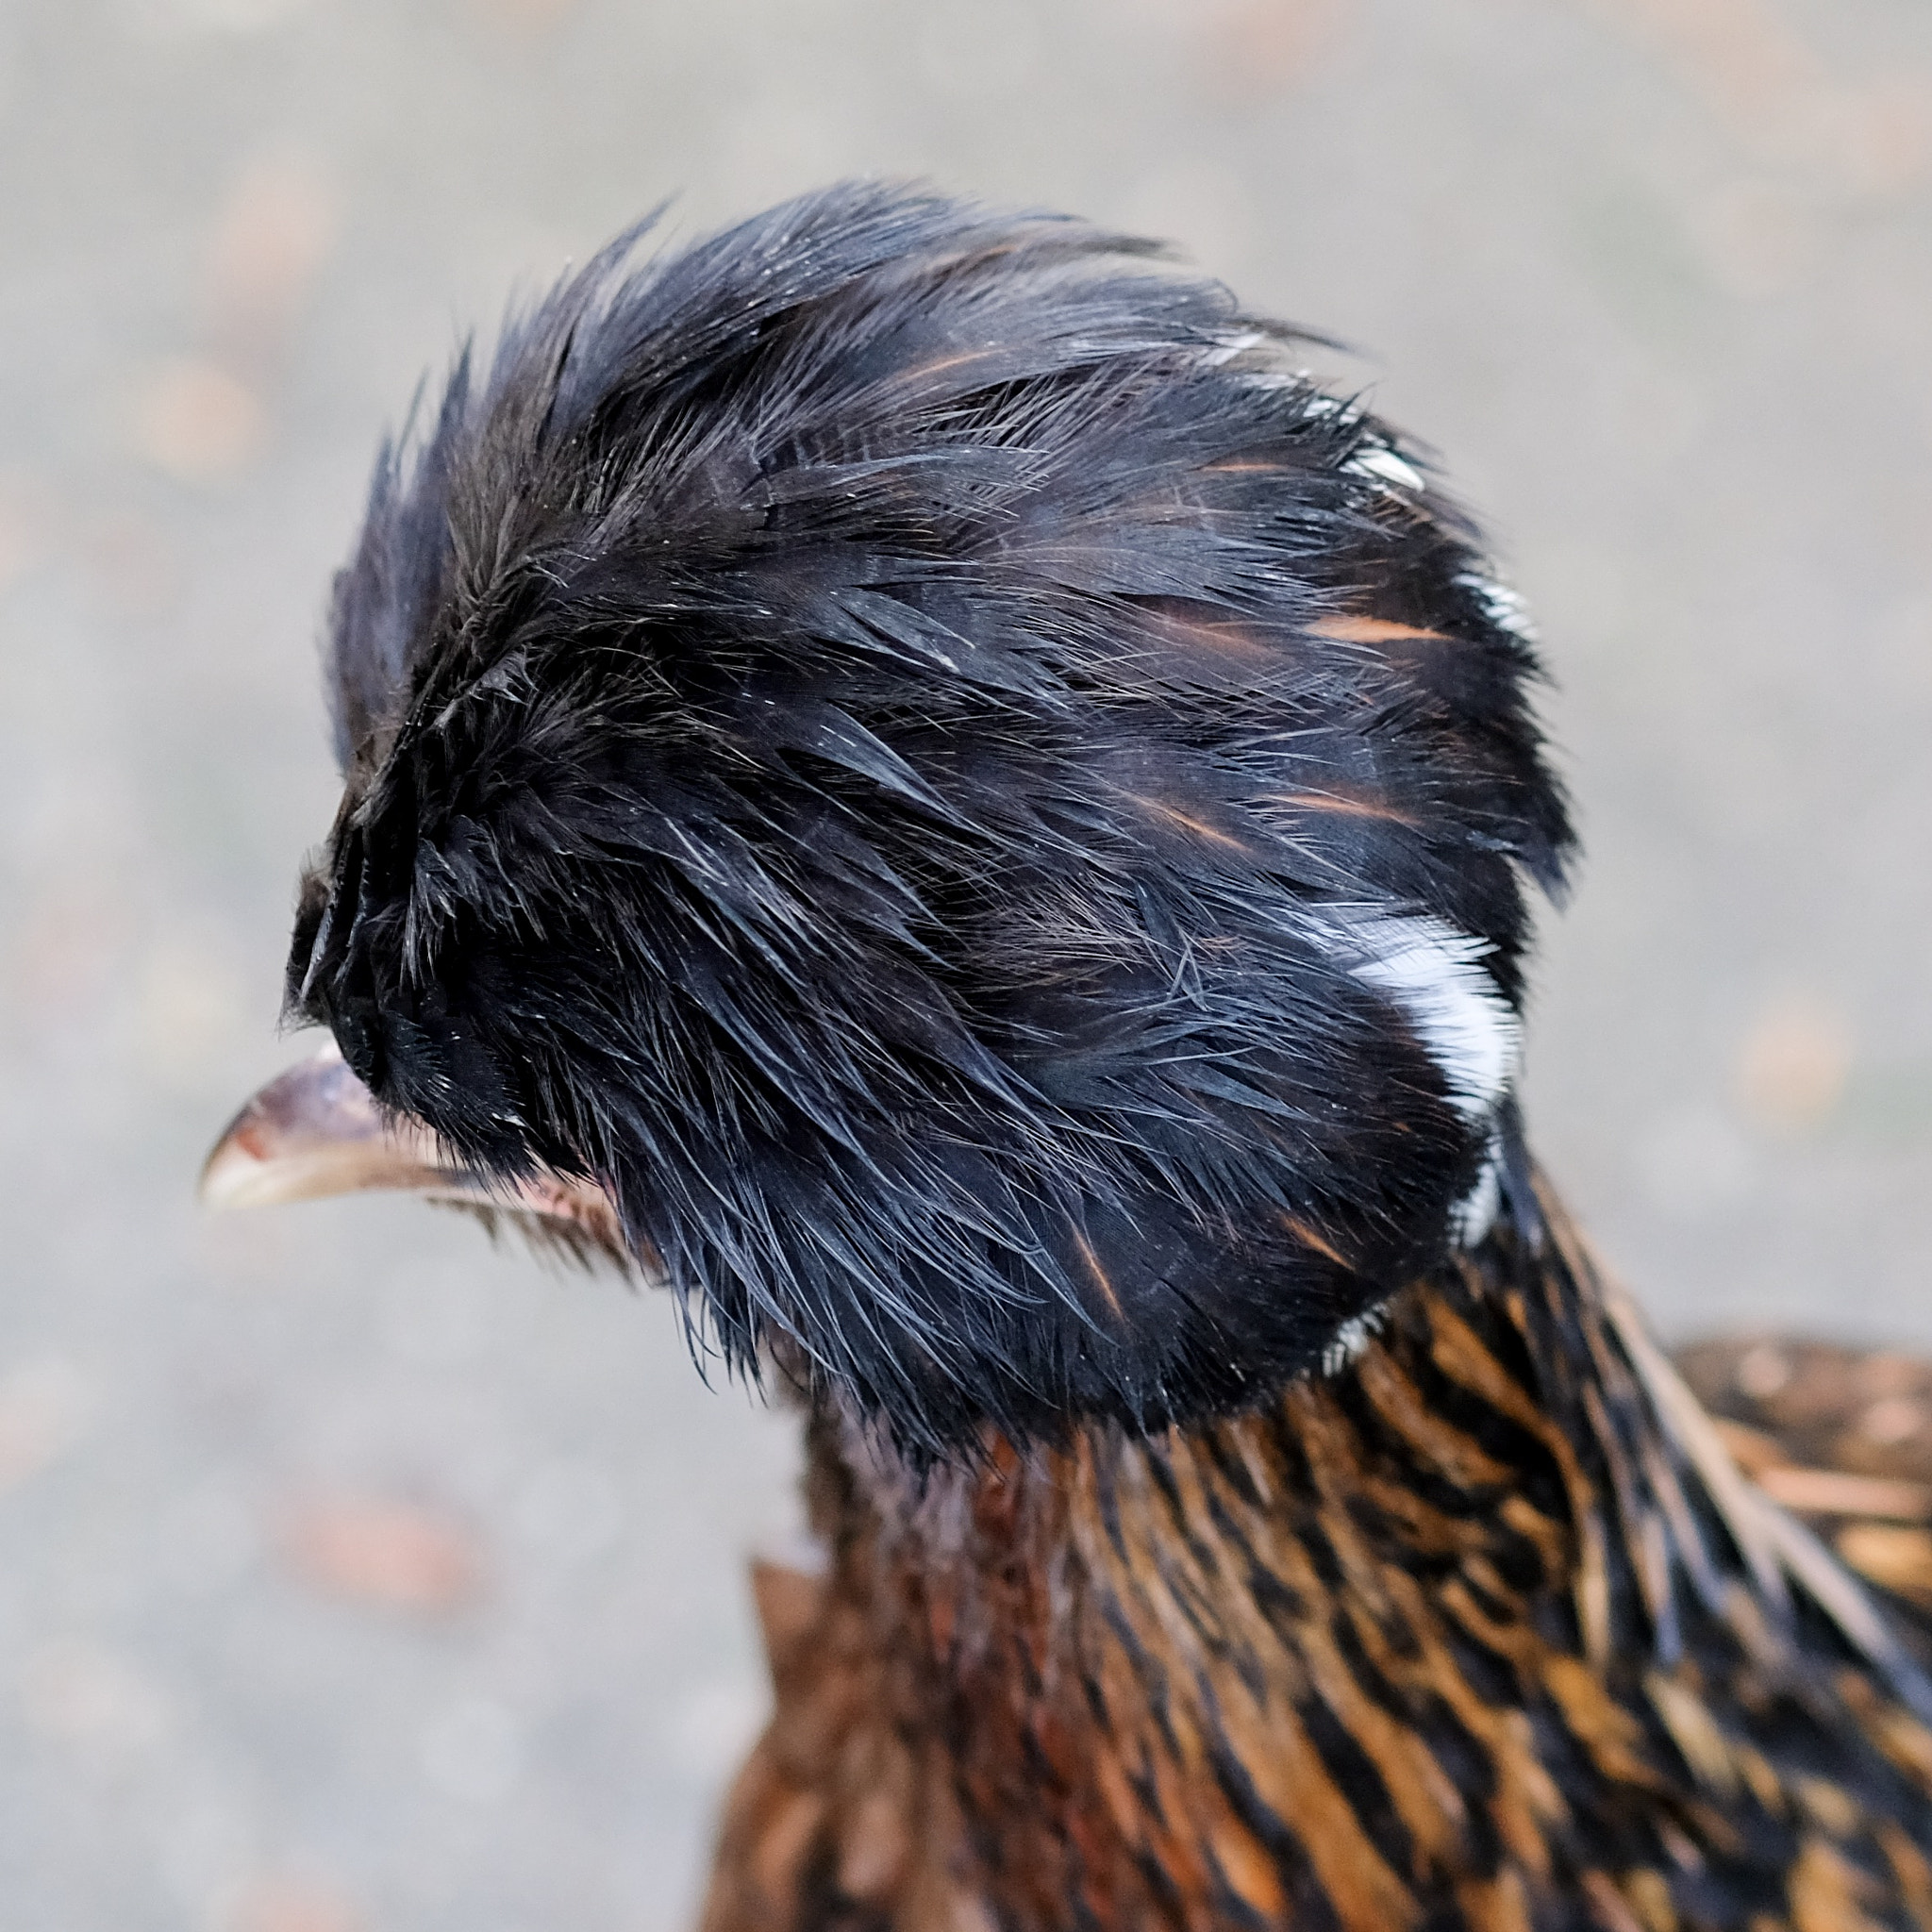 Fujifilm X-T2 + Fujifilm XF 60mm F2.4 R Macro sample photo. Stylin'. this chicken is very proud of its head of "hair"! photography